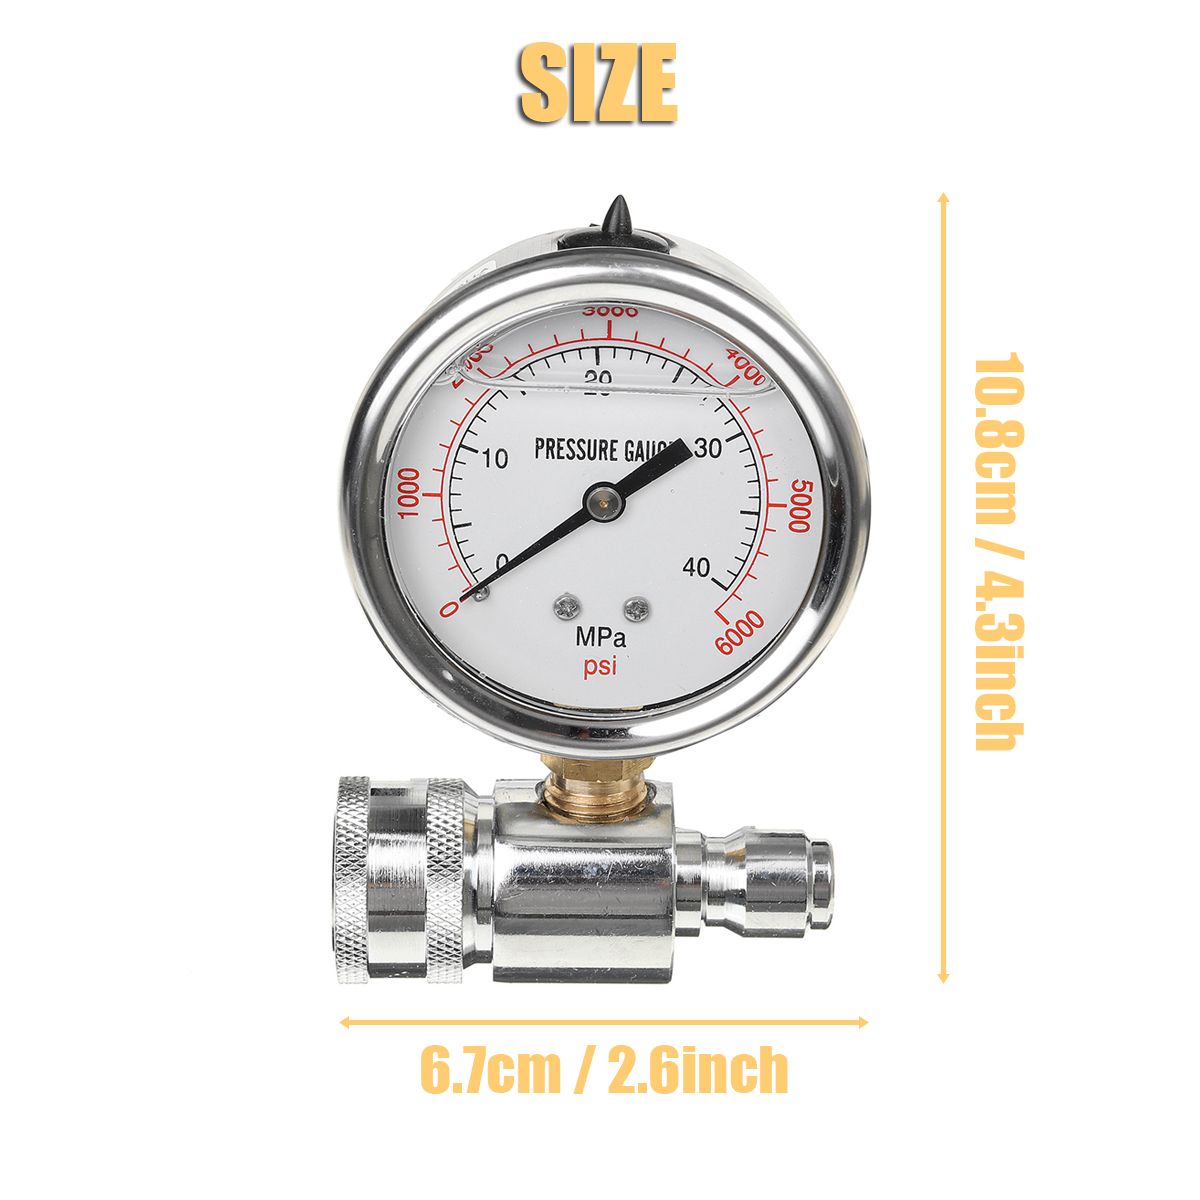 Axial-Hydraulic-Pressure-Gauge-Test-40MPa-6000PSI-Stainless-Steel-Indicator-1649889